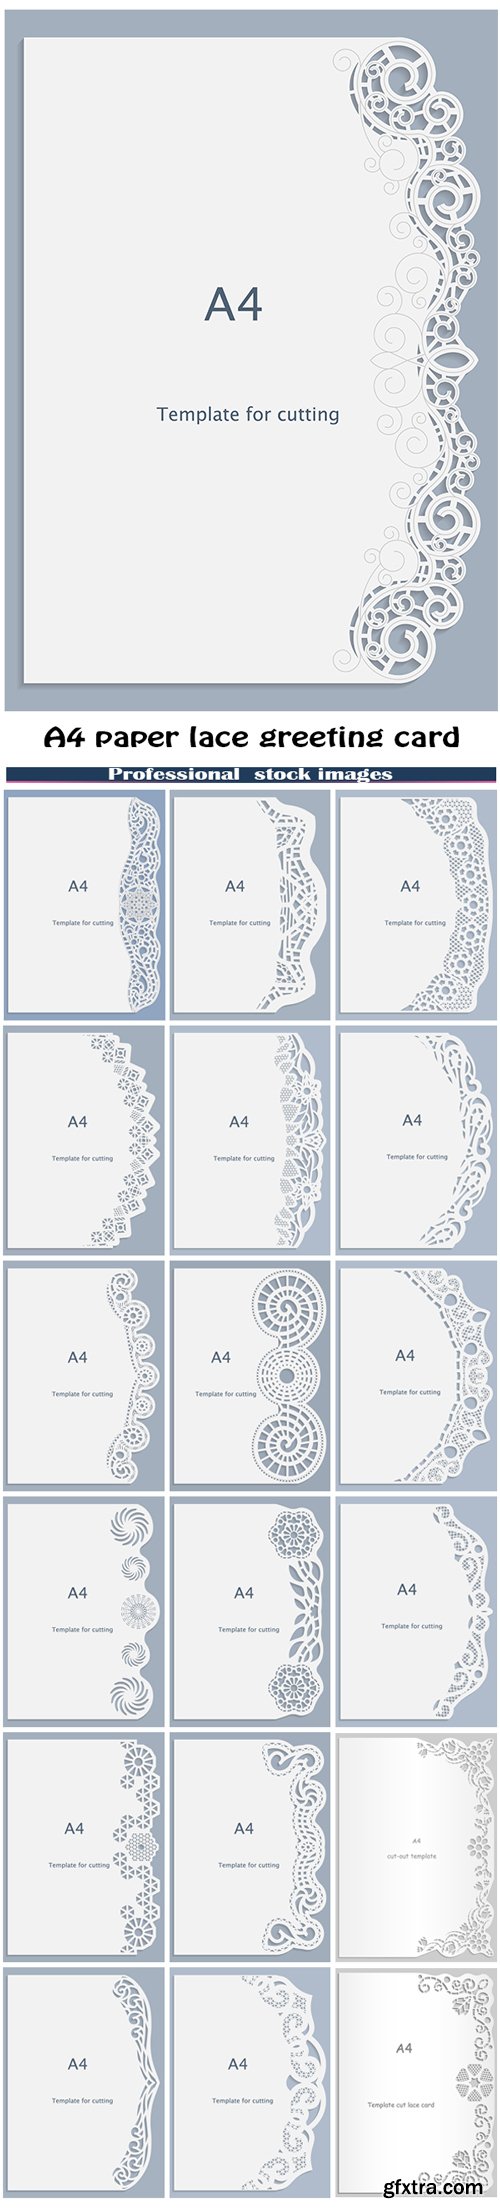 A4 paper lace greeting card, white pattern, cut-out template